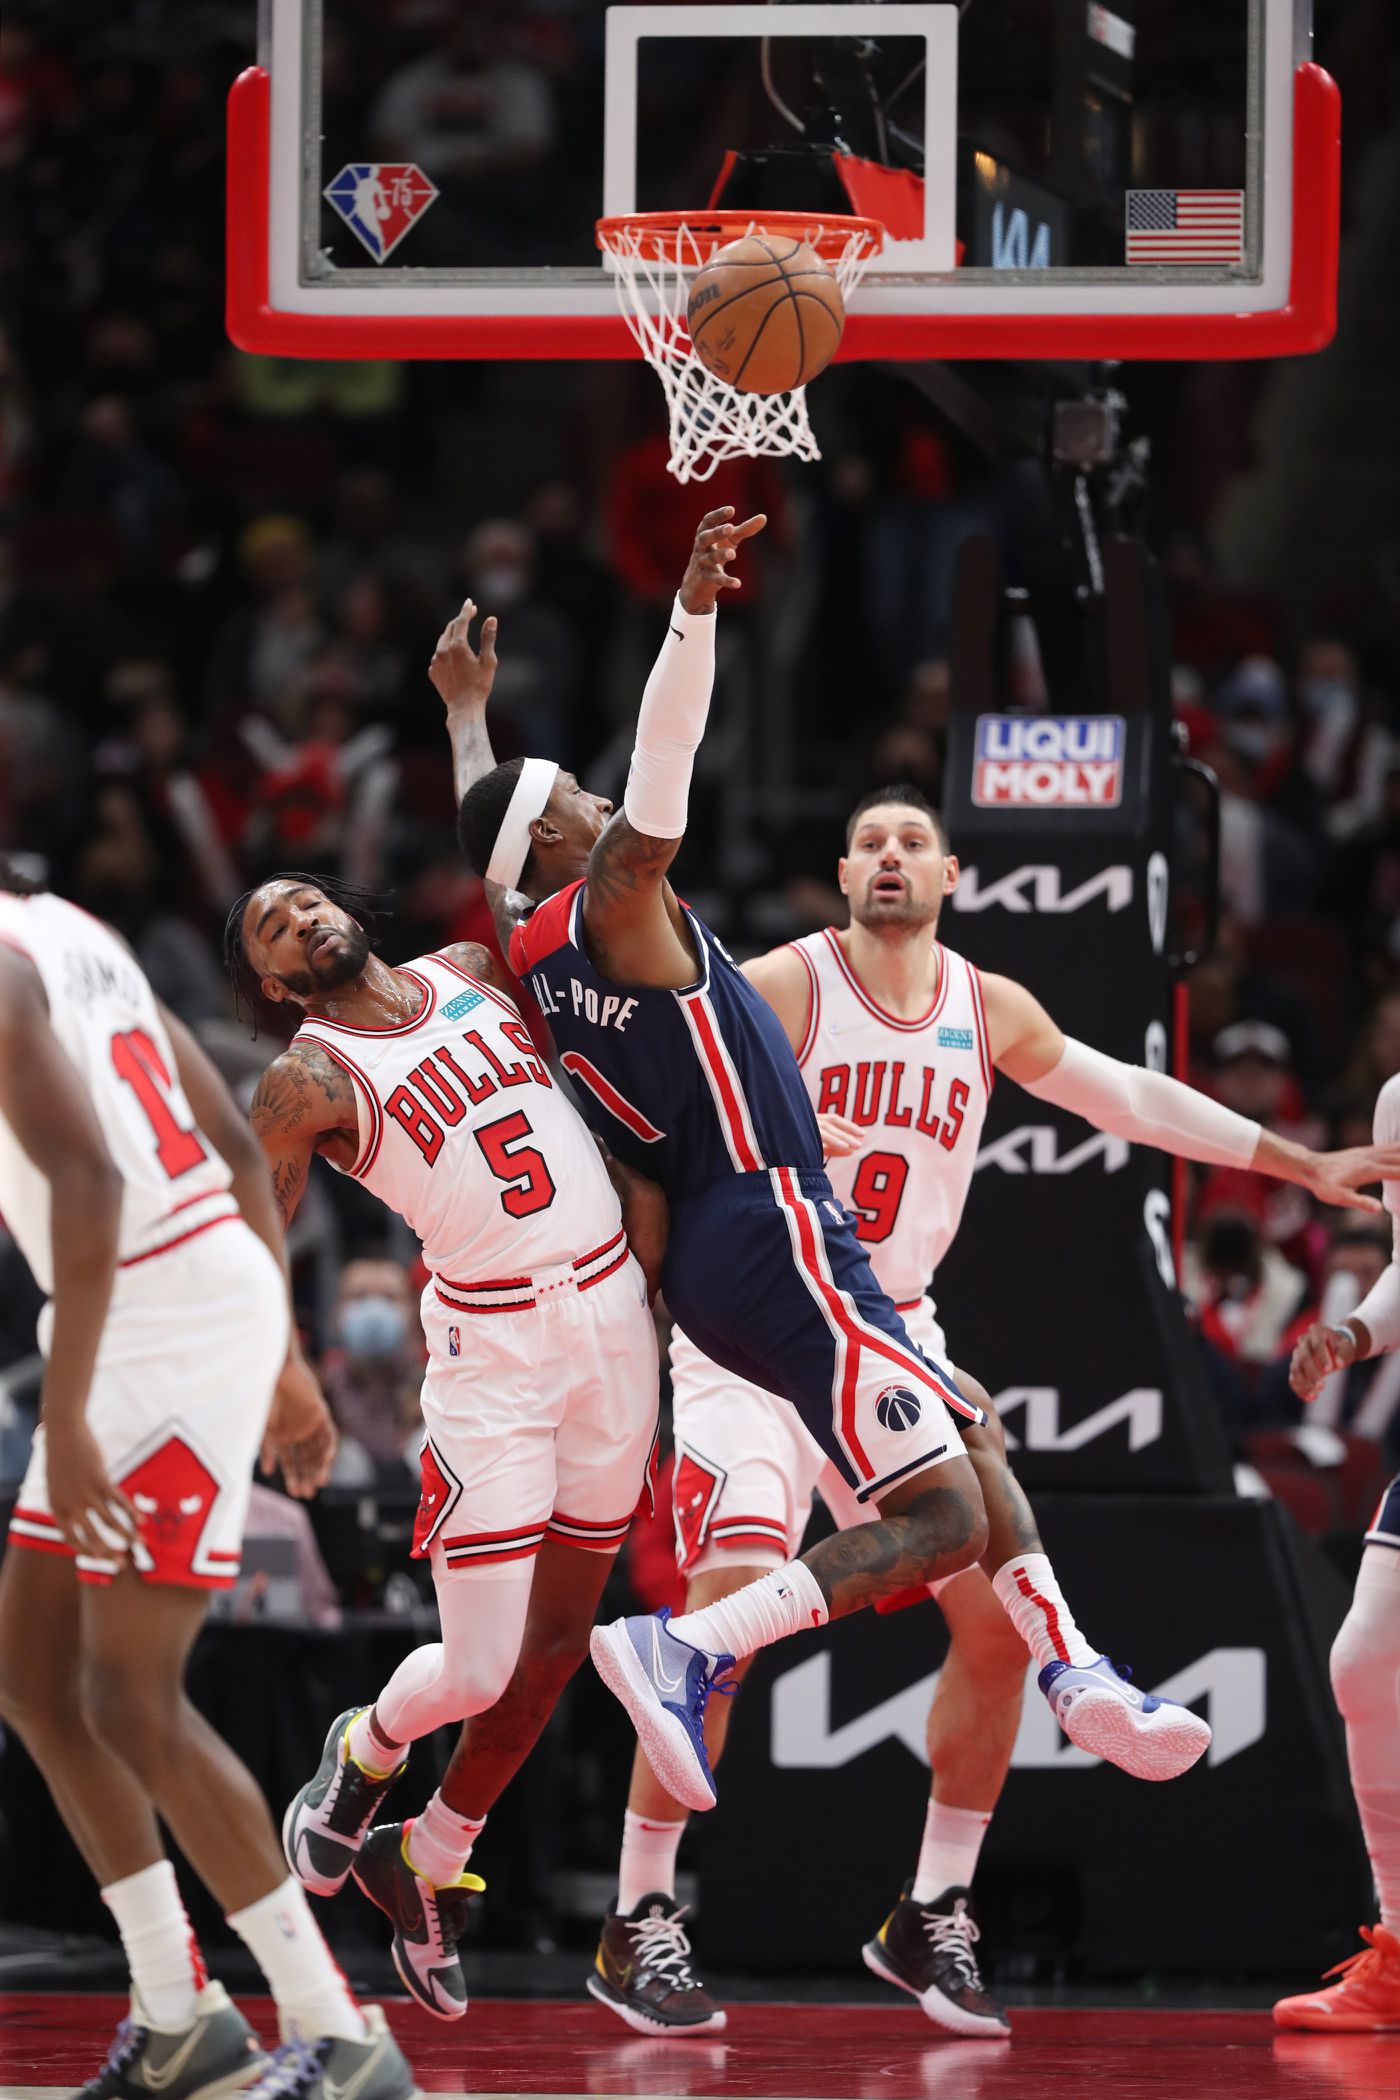 Chicago Bulls forward Derrick Jones Jr. (5) fouls Washington Wizards guard Kentavious Caldwell-Pope (1) in the first quarter at United Center on Jan. 7, 2022, in Chicago.